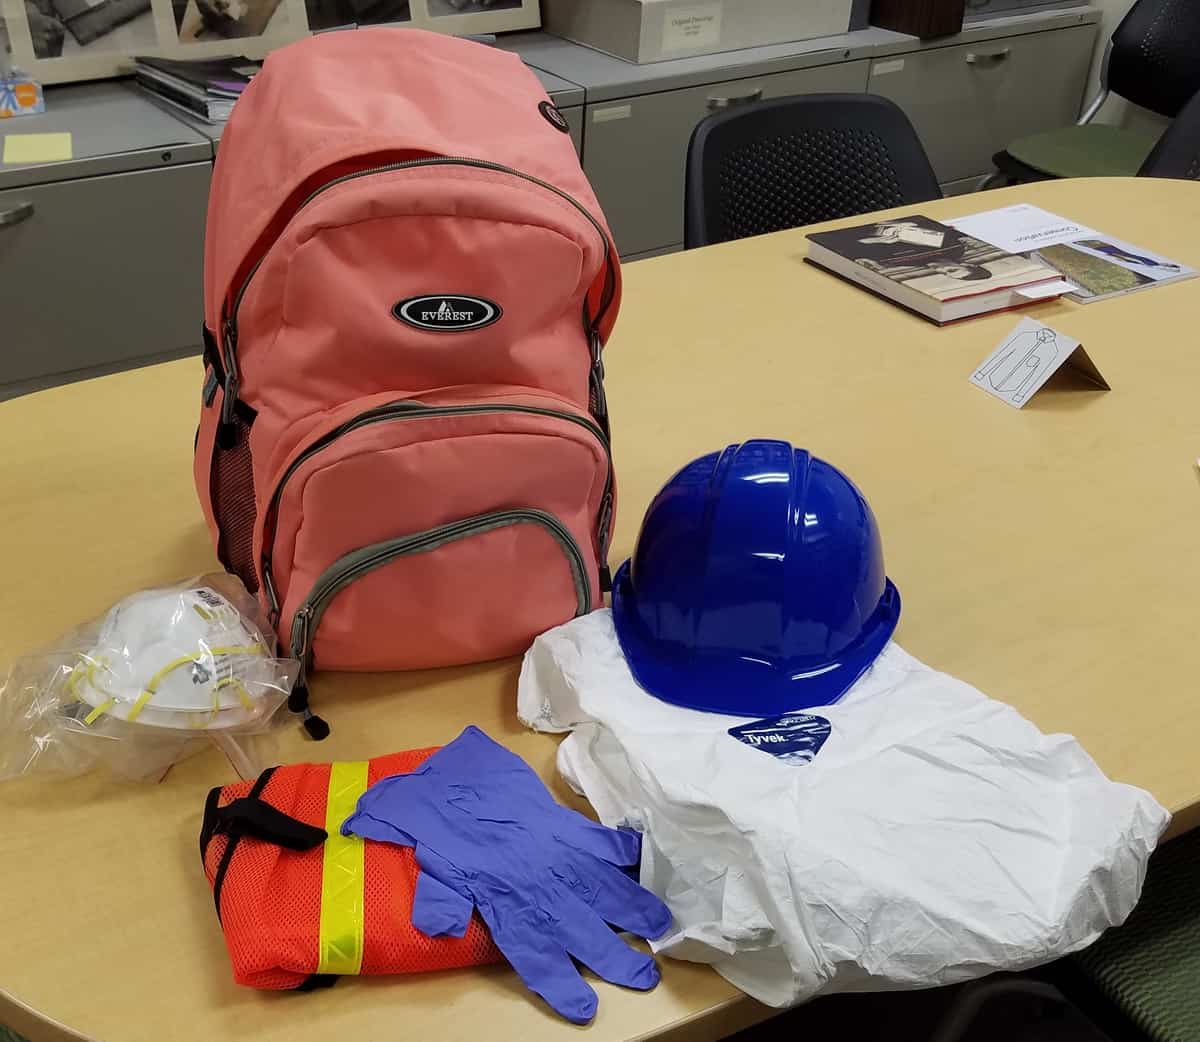 Pictures shows a pink backpack with items sitting in front of it. These items are a hard hat, Tyvek suits, gloves, a safety vest, and respiratory masks.